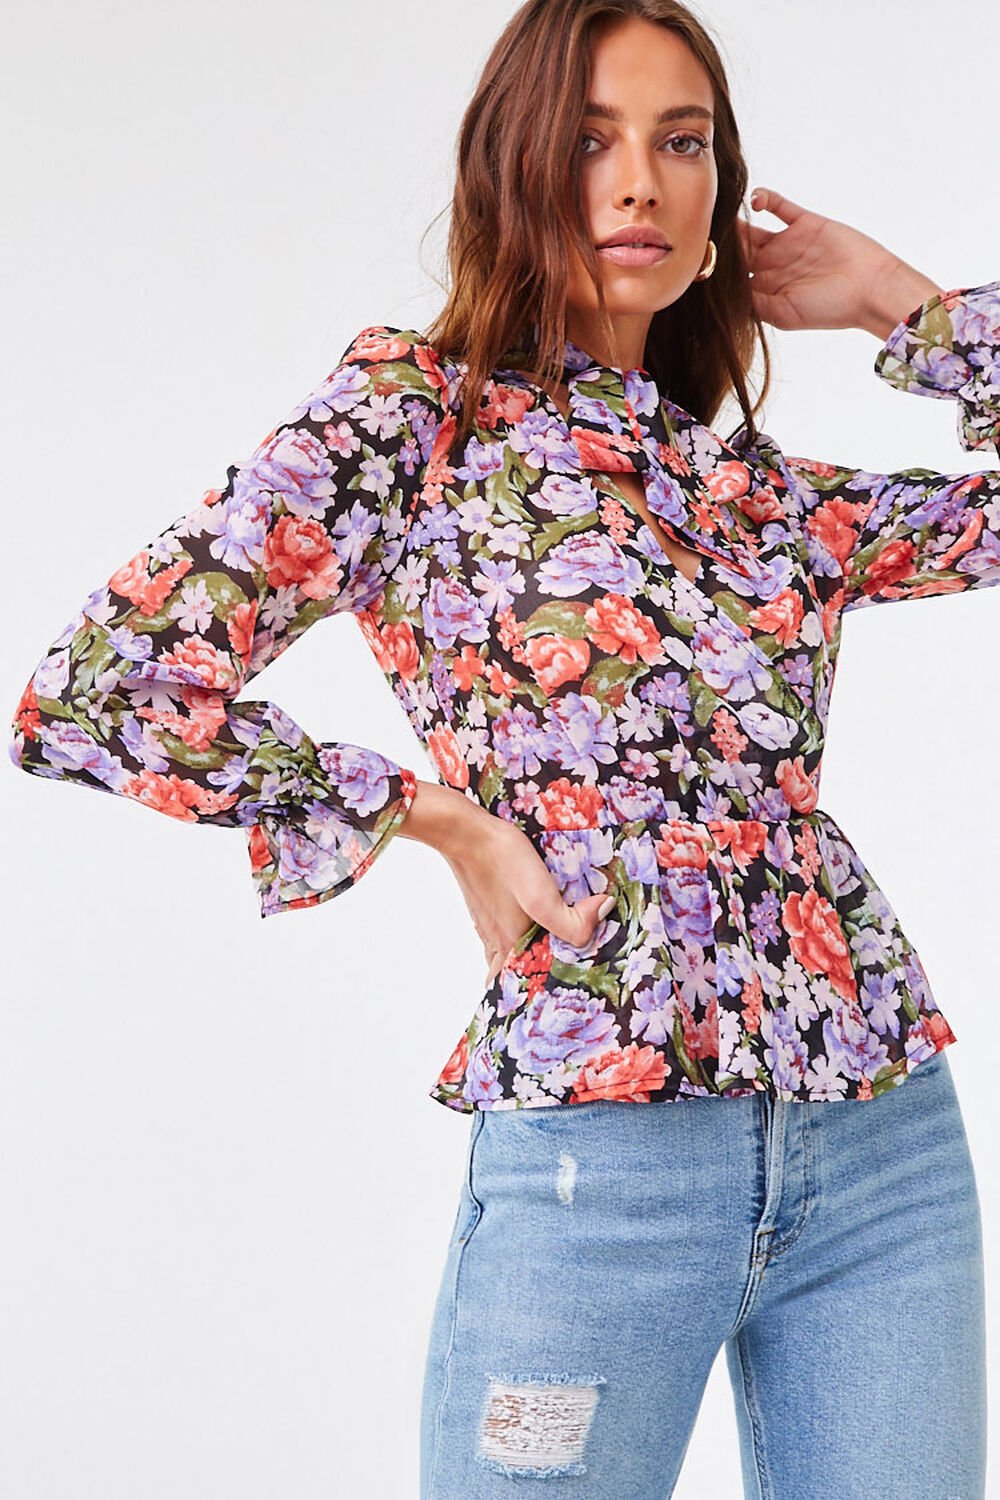 Floral Chiffon Pussycat Bow Top, image 1